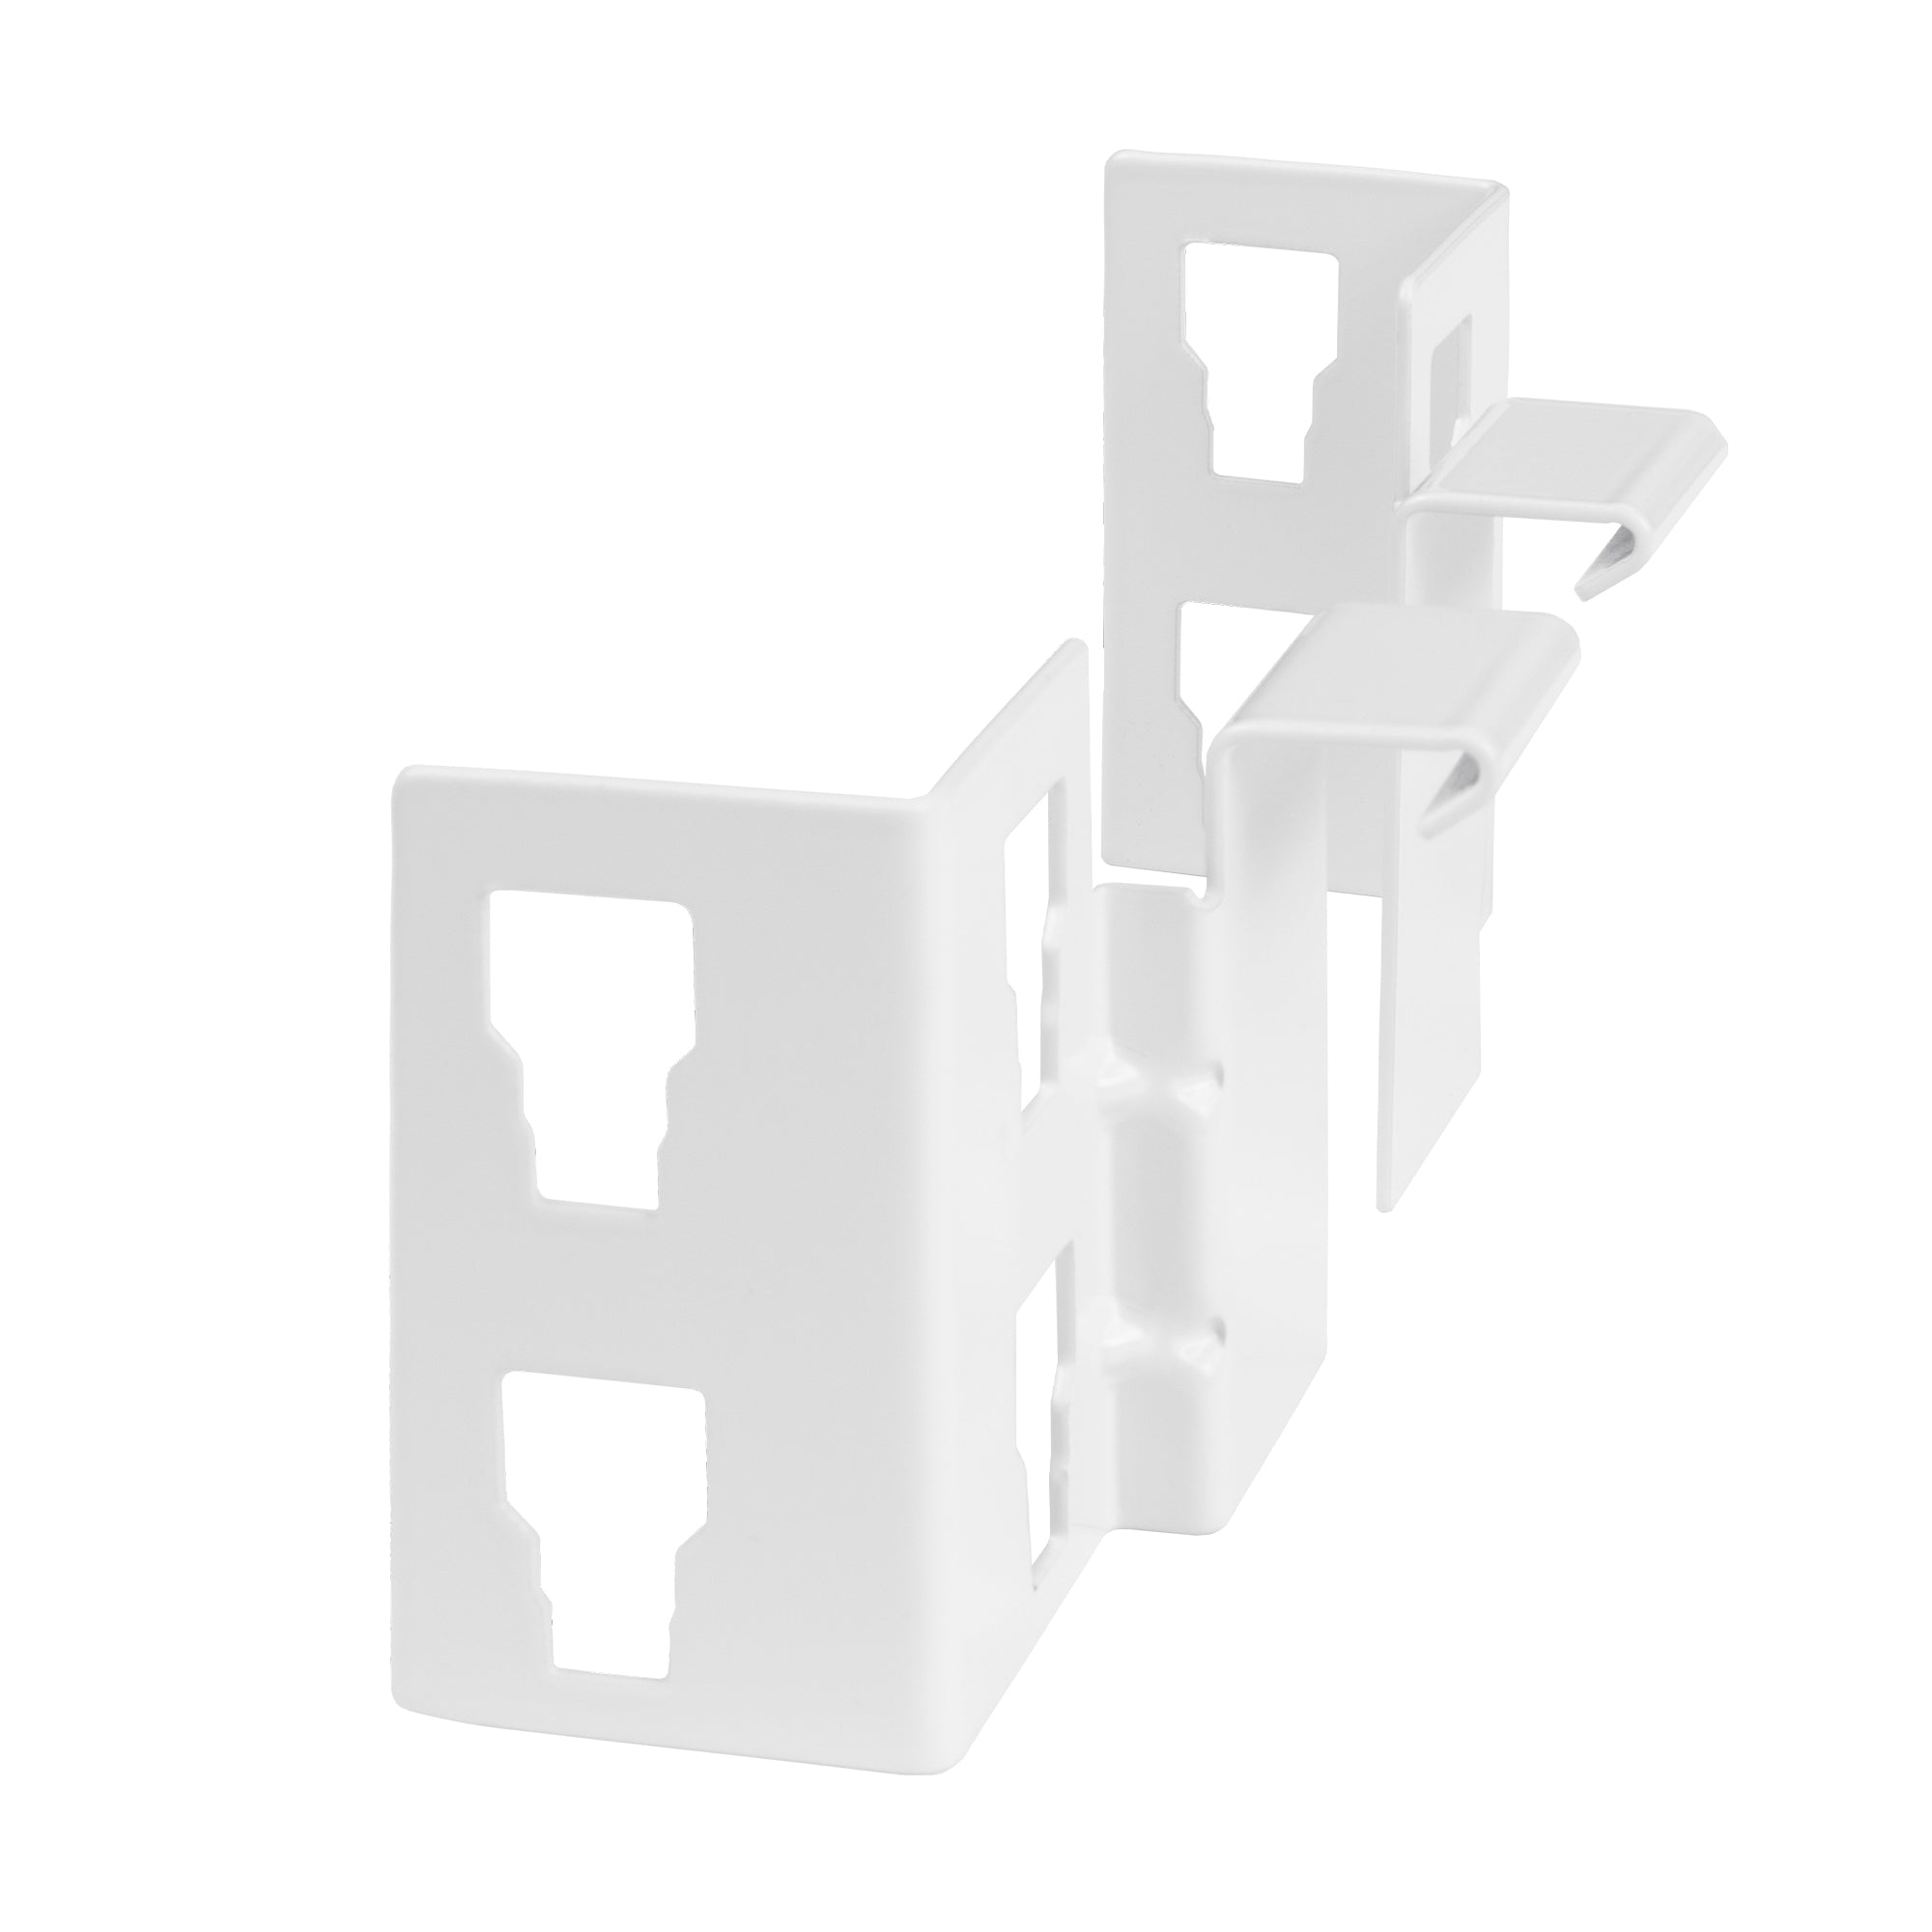 The Classic Clothing Rack+Shelf 2 Sets with L-Corner Bracket in White